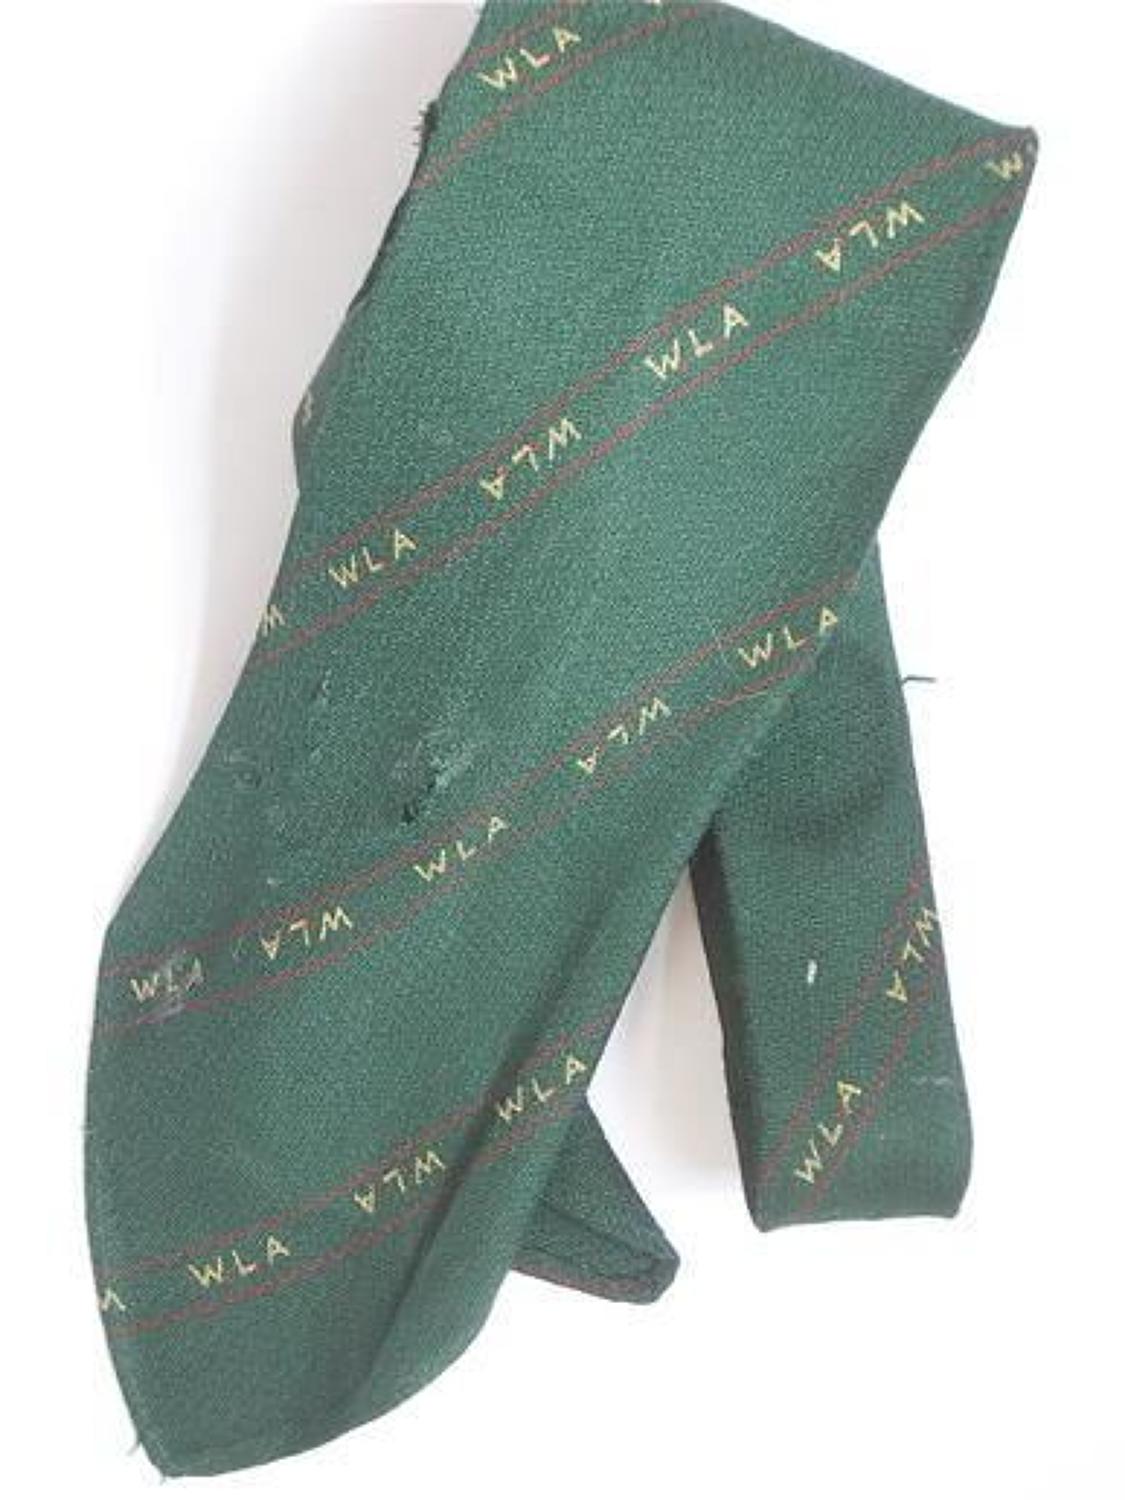 WW2 Women's Land Army Official Tie.